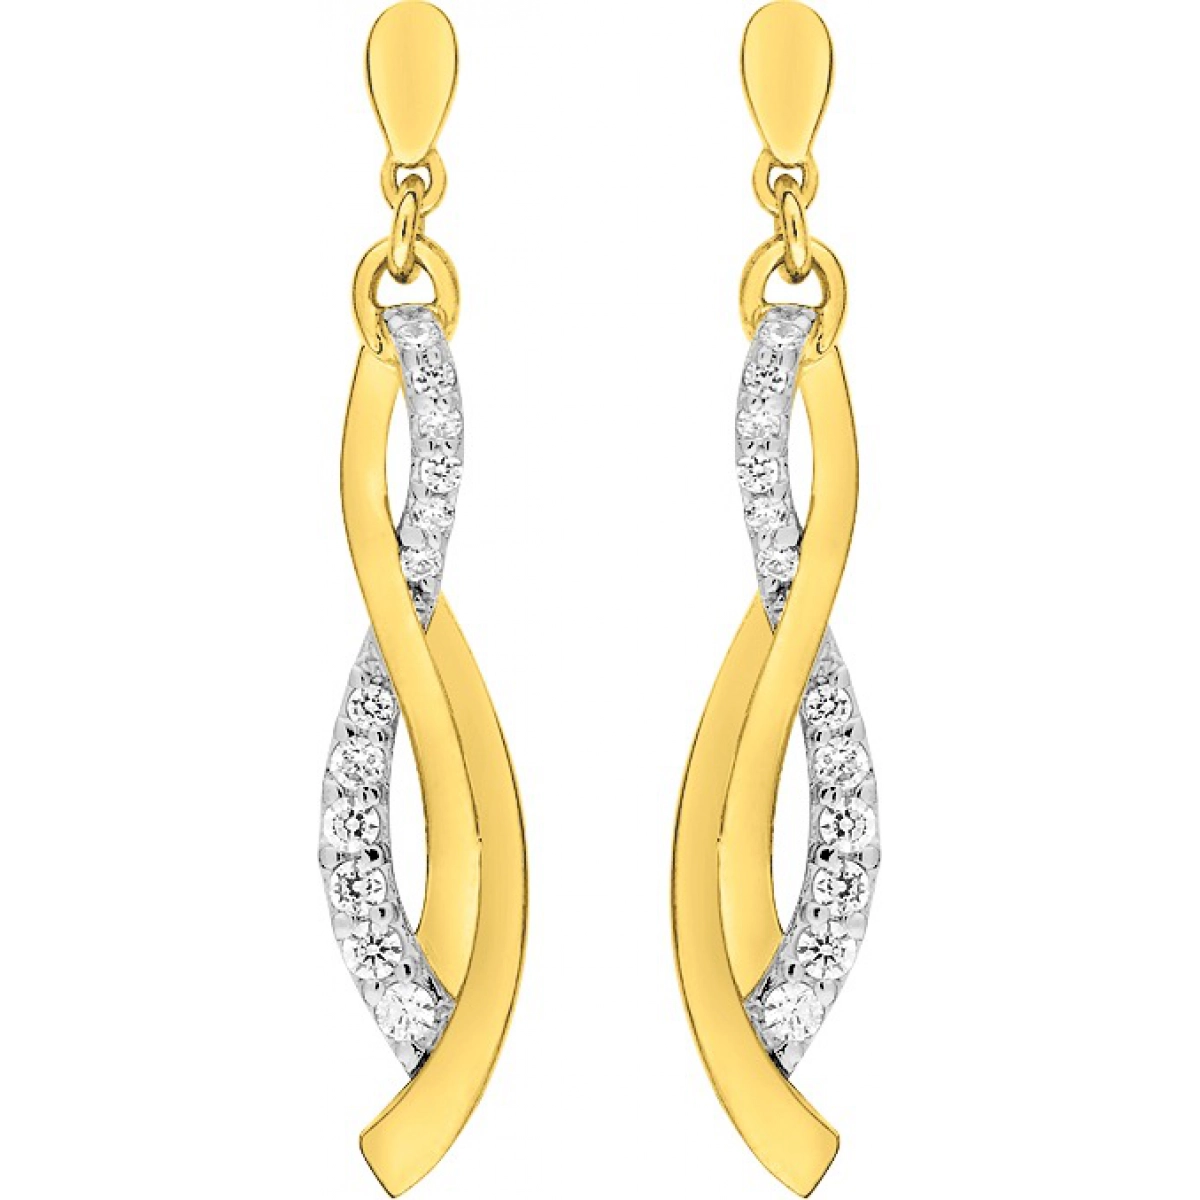 Earrings pair w. cz gold plated Brass 2TG  Lua Blanca  BSWH95Z.0